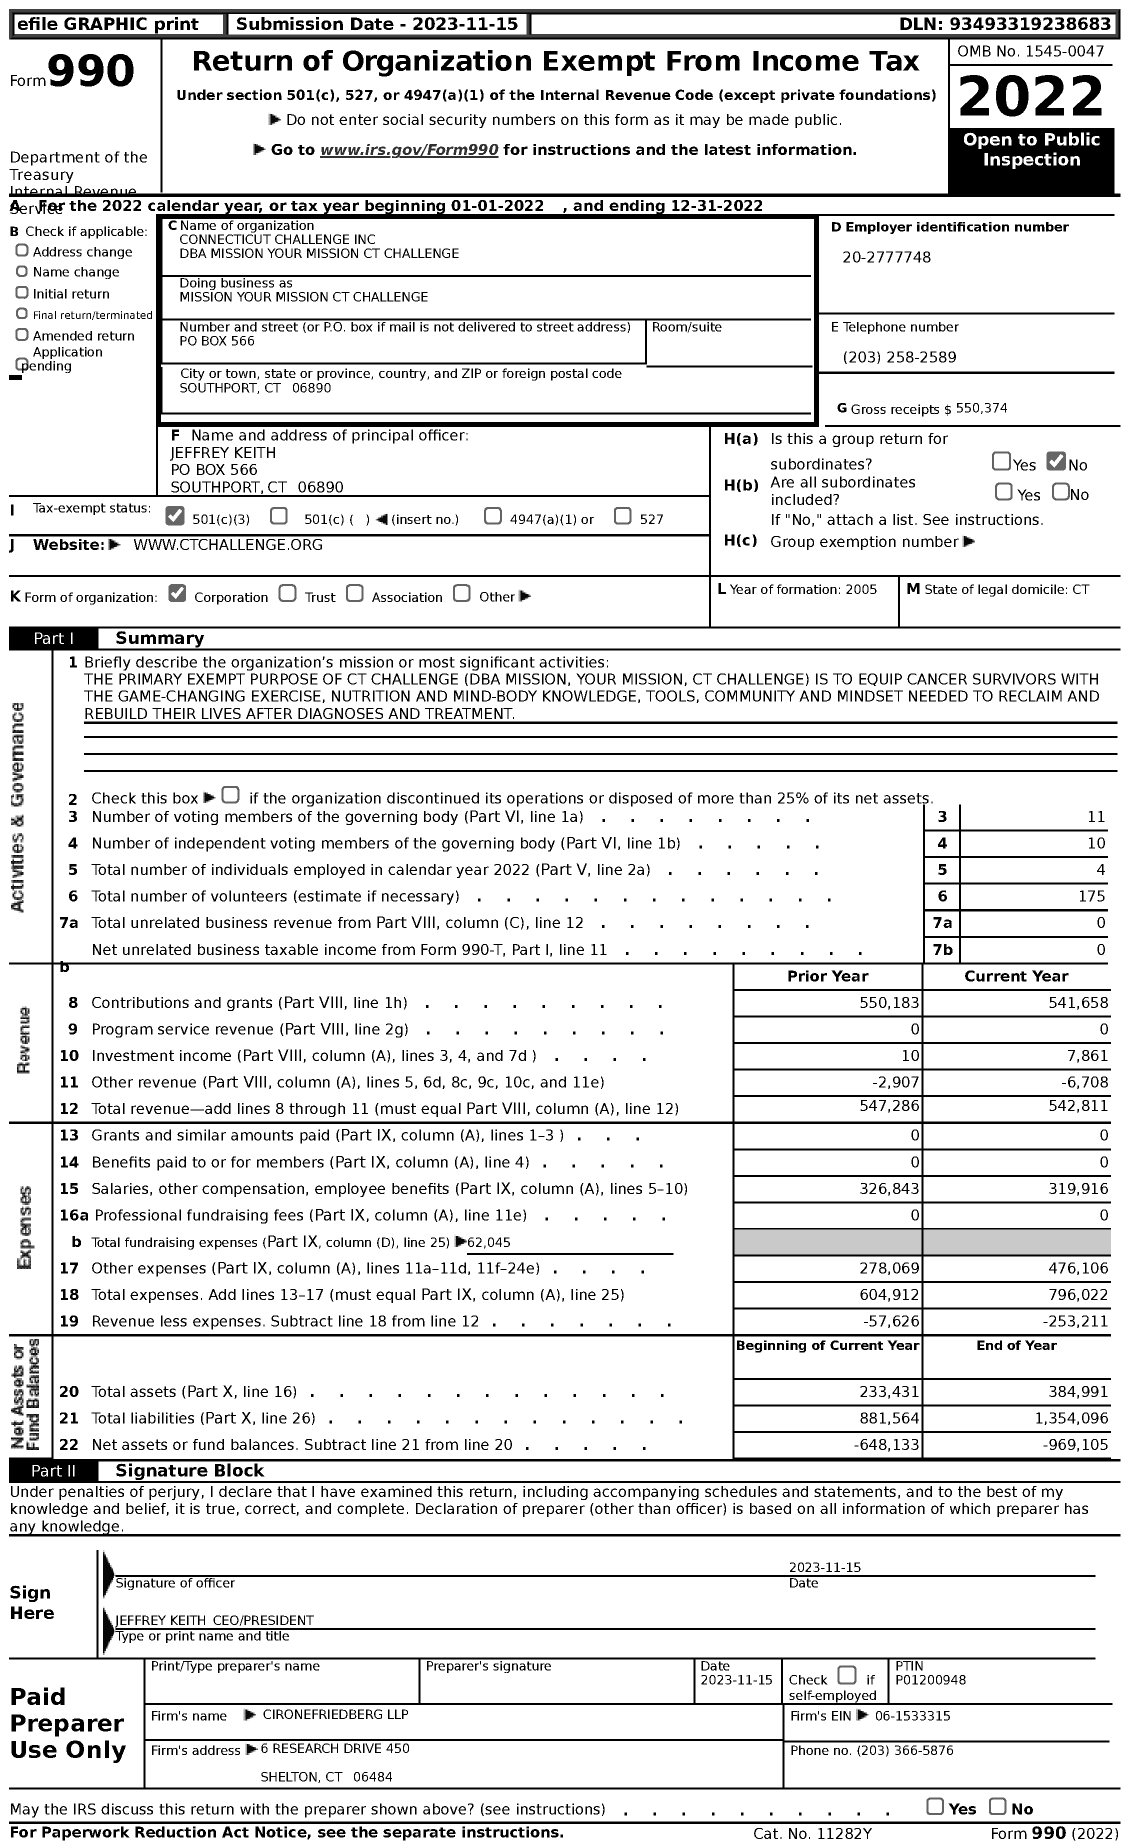 Image of first page of 2022 Form 990 for Mission Your Mission CT Challenge